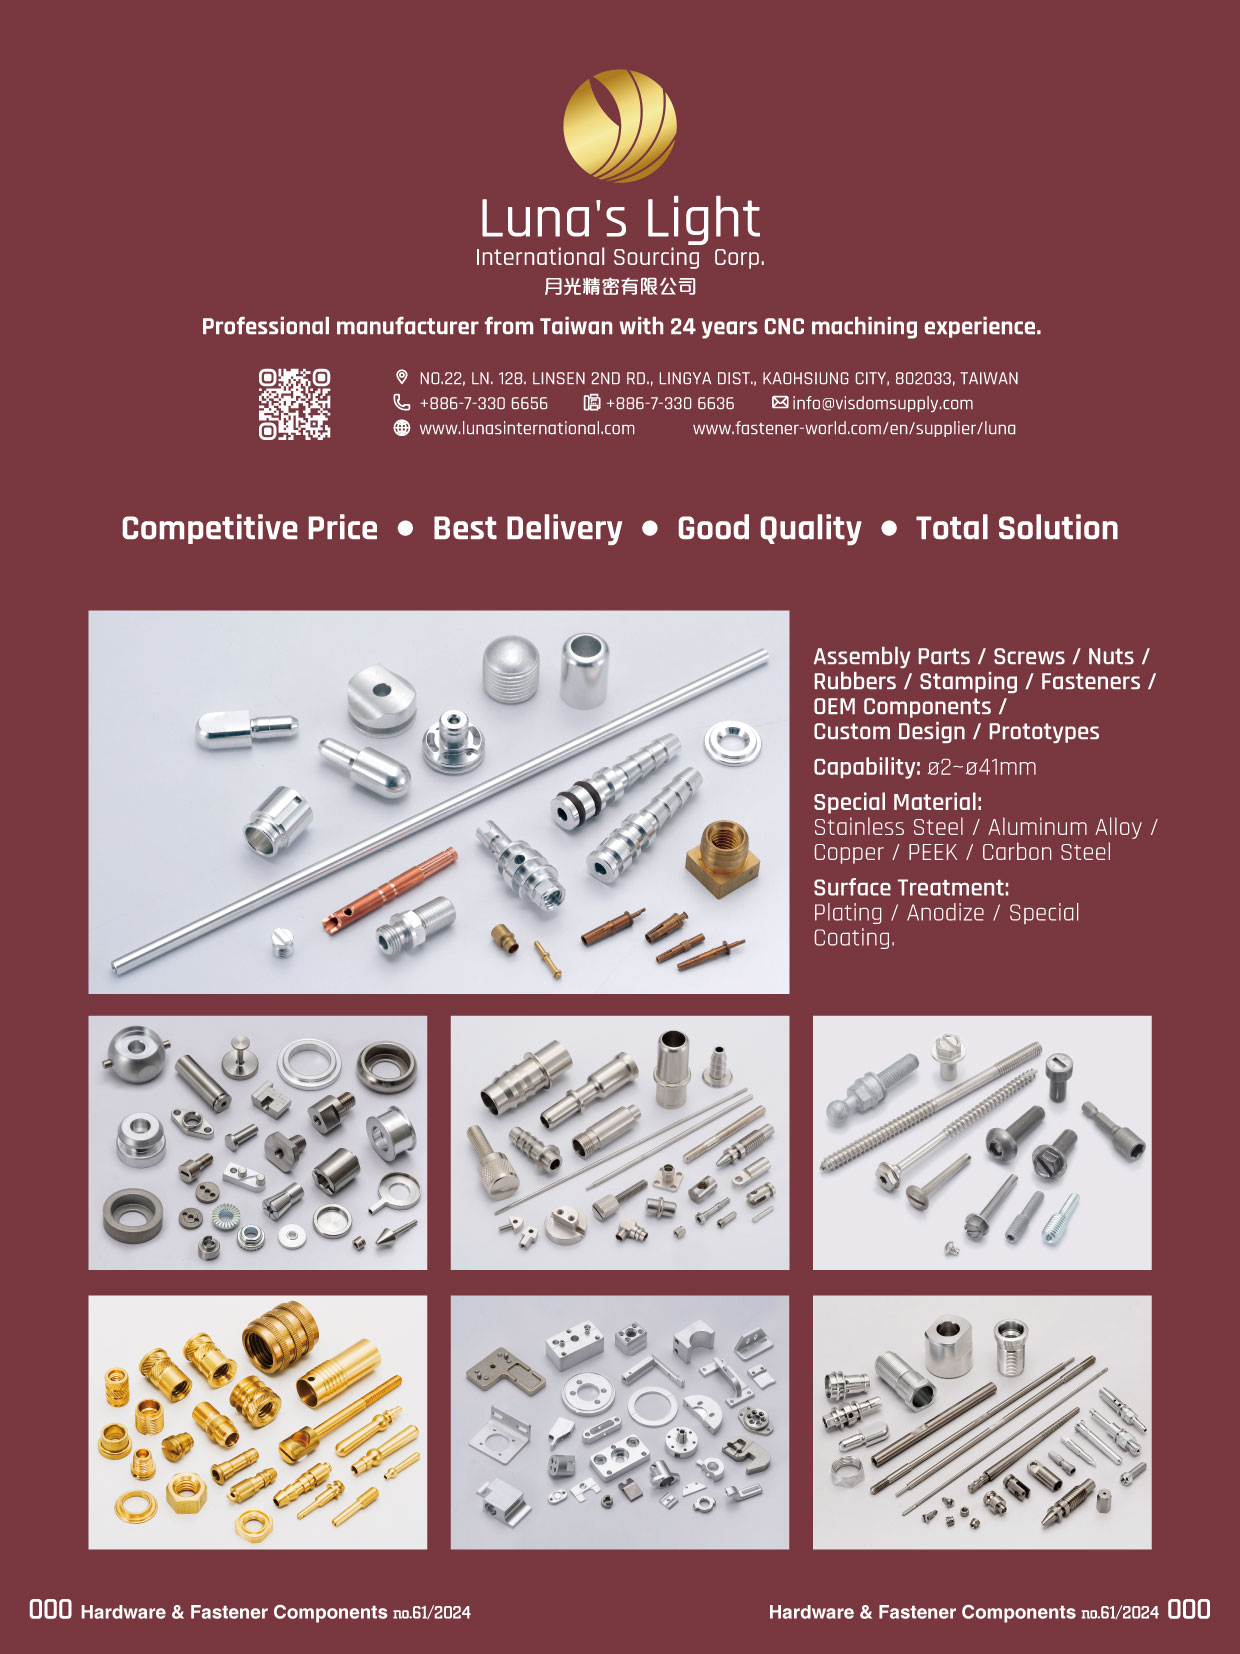   CNC Machining Parts, Assembly Parts, Screws, Nuts, Rubbers, Stamping Fasteners, OEM Components, Custom Design, Prototypes